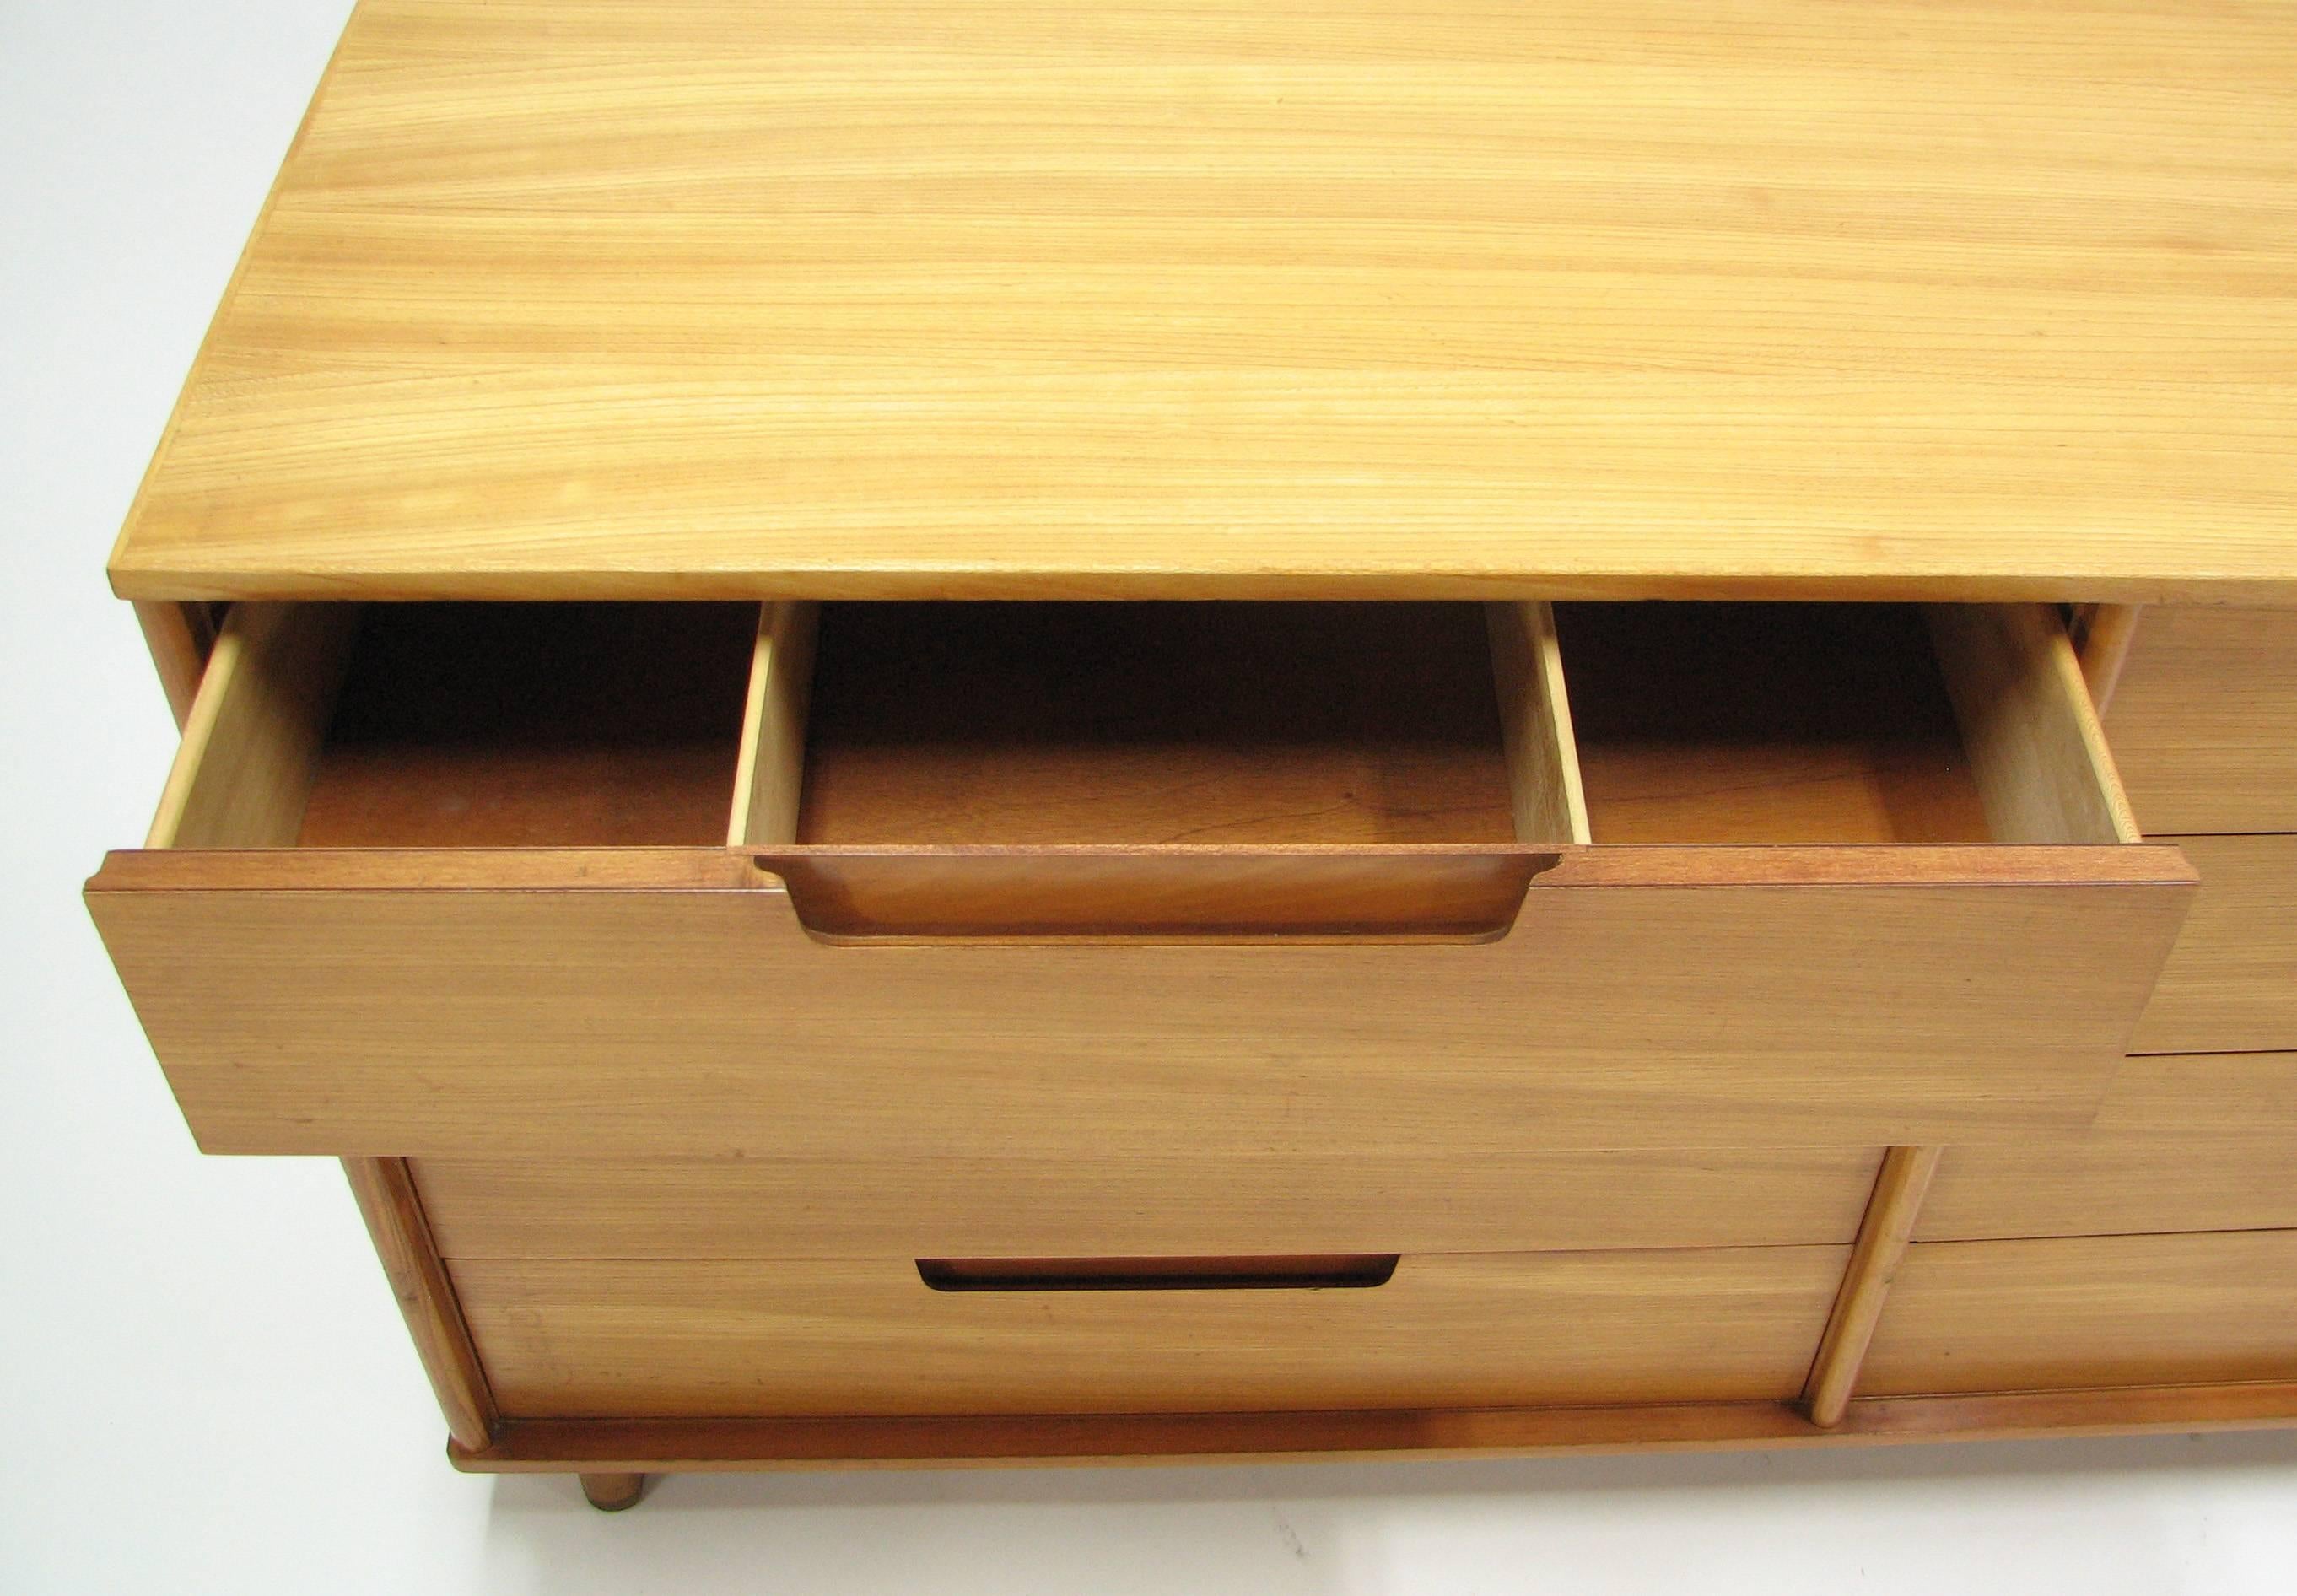 20th Century Timeless Mid-Century Modern Dresser by Milo Baughman for Drexel “Today’s Living”